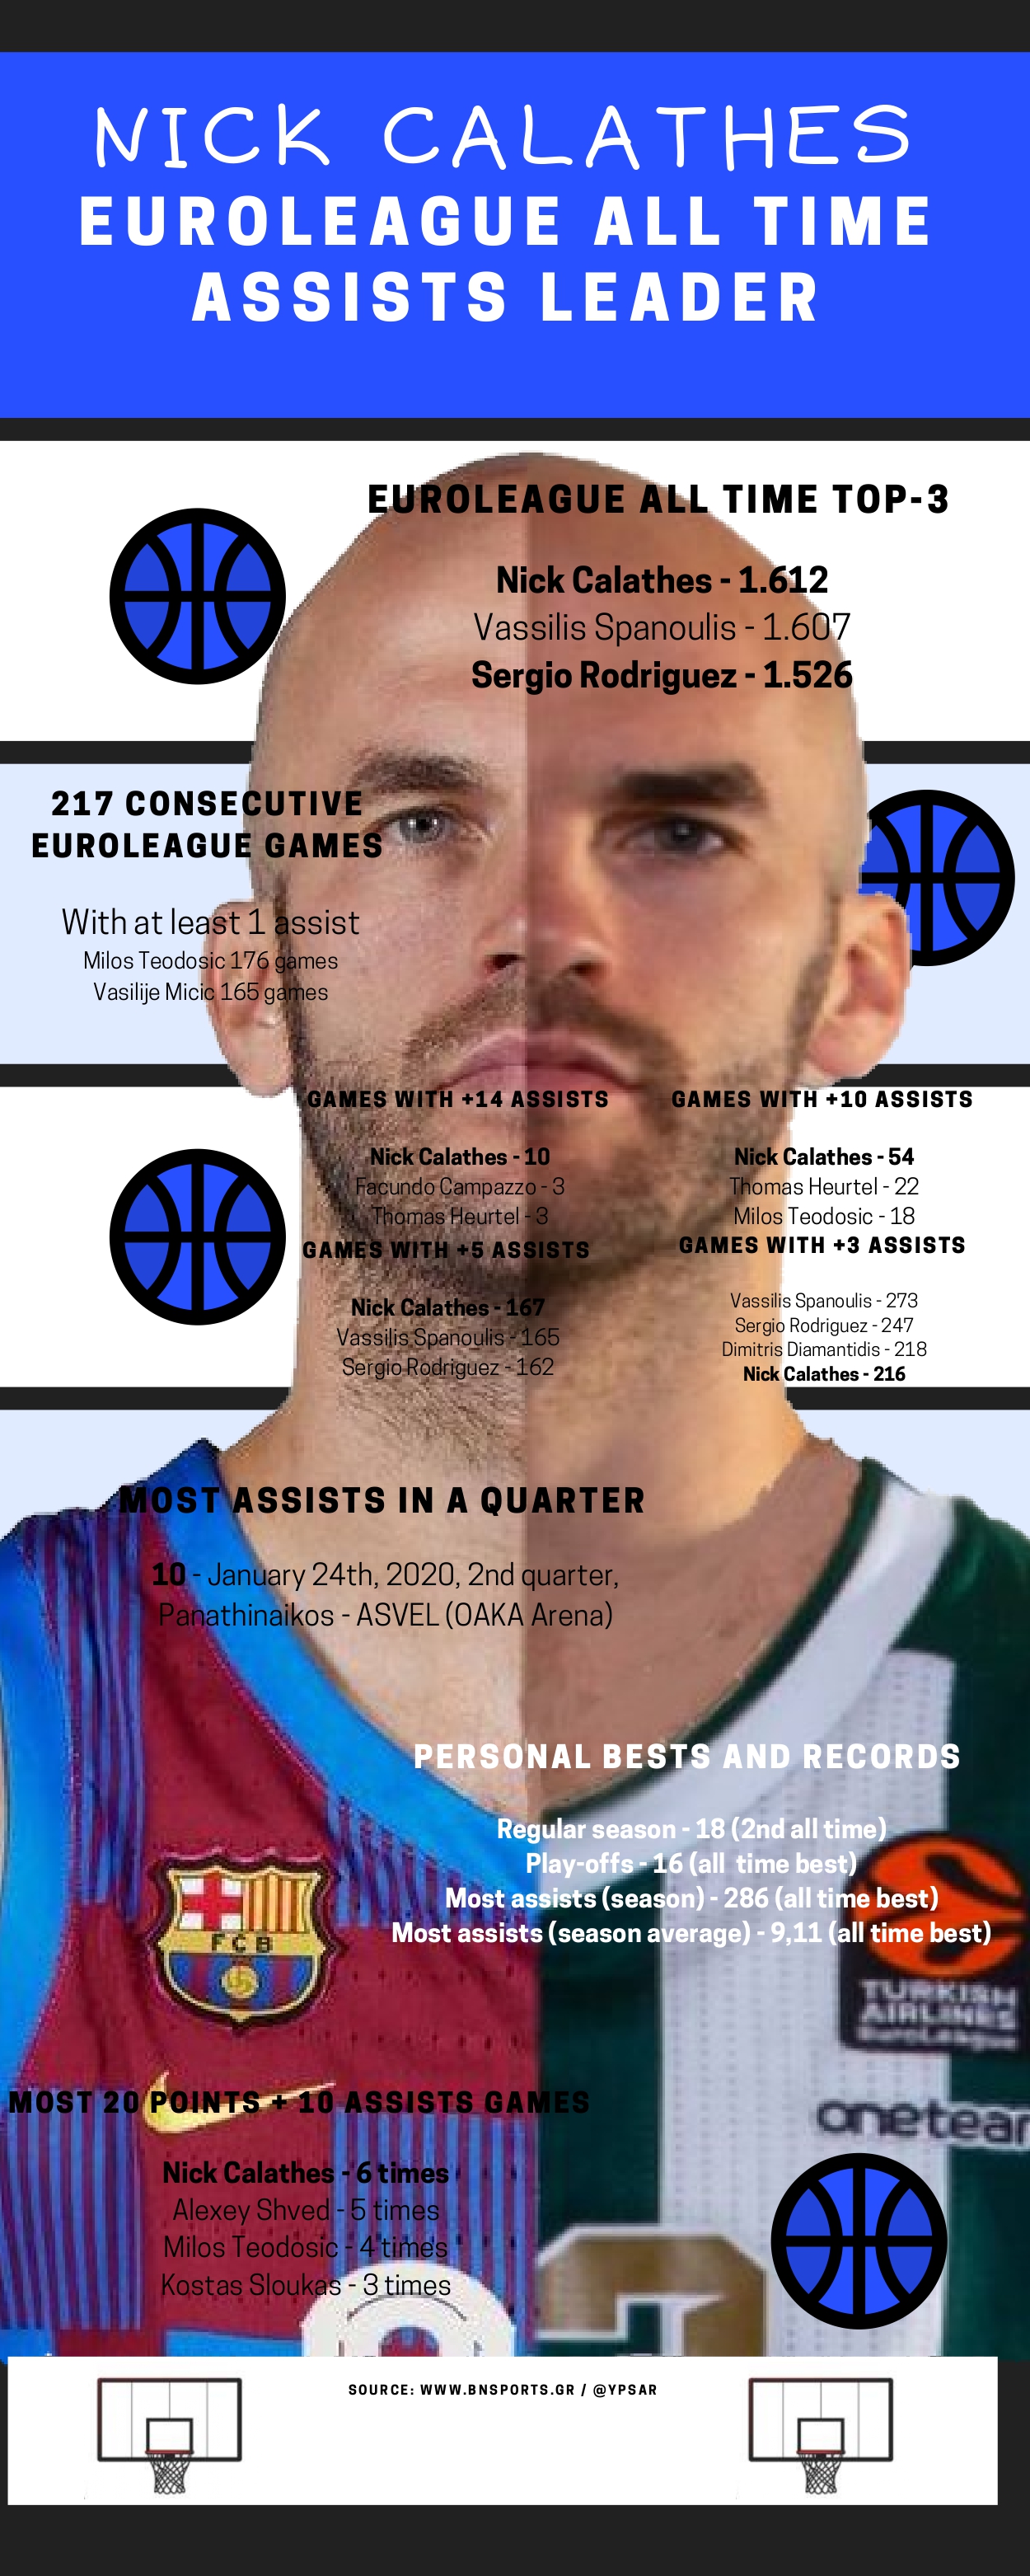 NICK_CALATHES_ALL_TIME_EUROLEAGUE_ASSIST_LEADER_1_page-0001.jpg